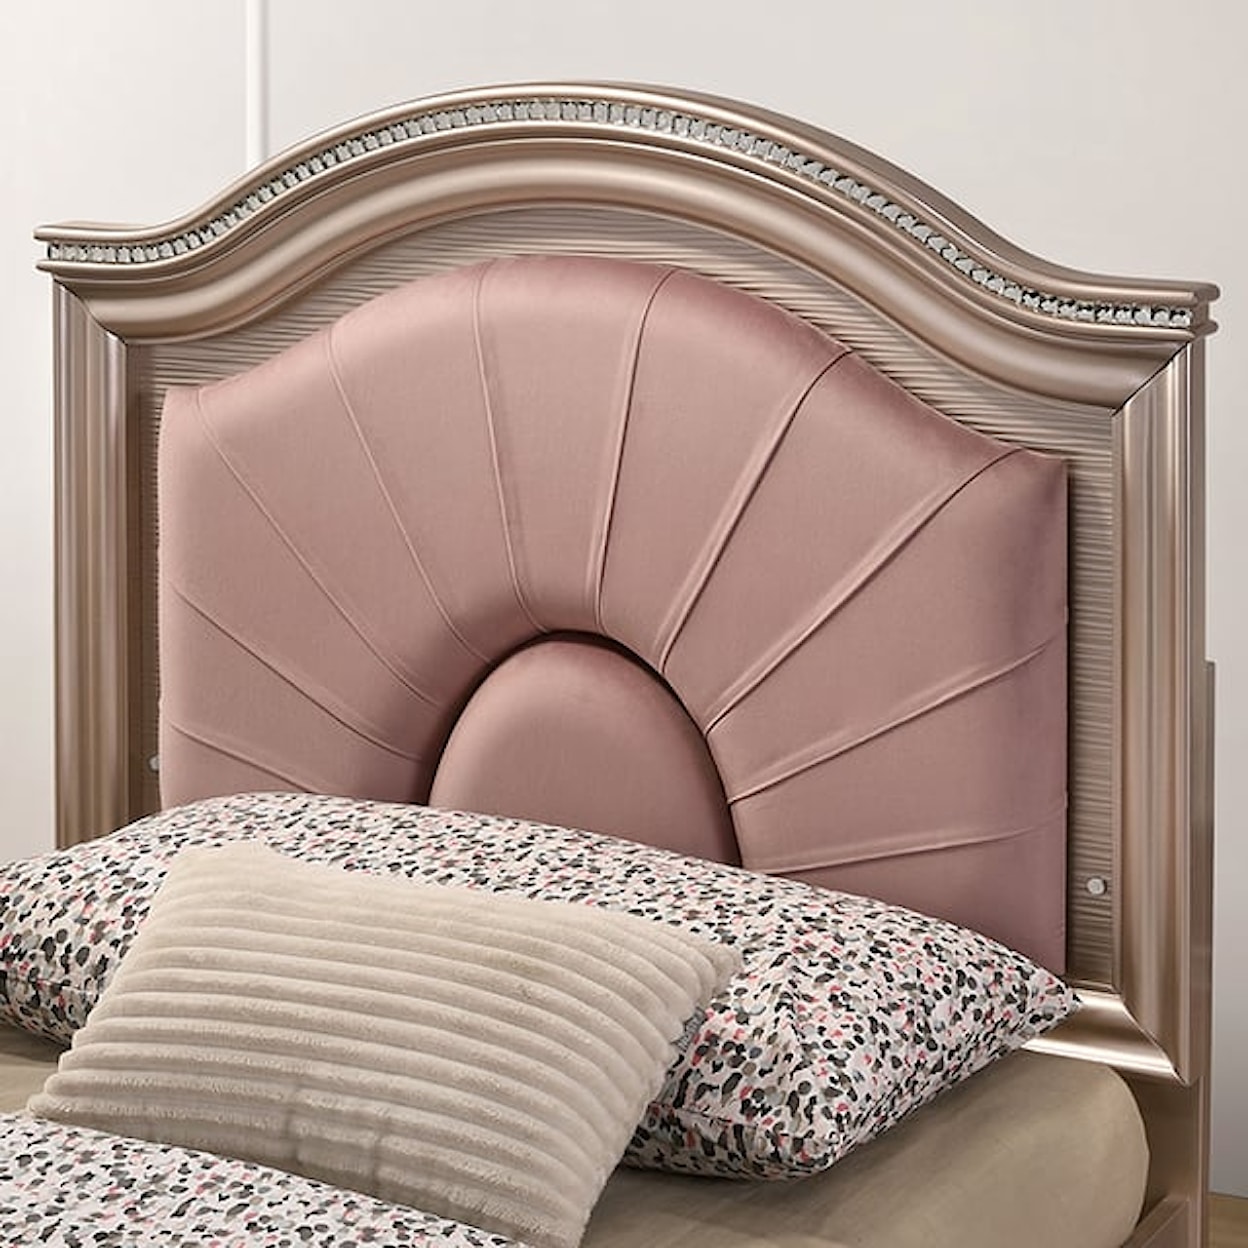 Furniture of America Allie Full Bed with Upholstered Headboard